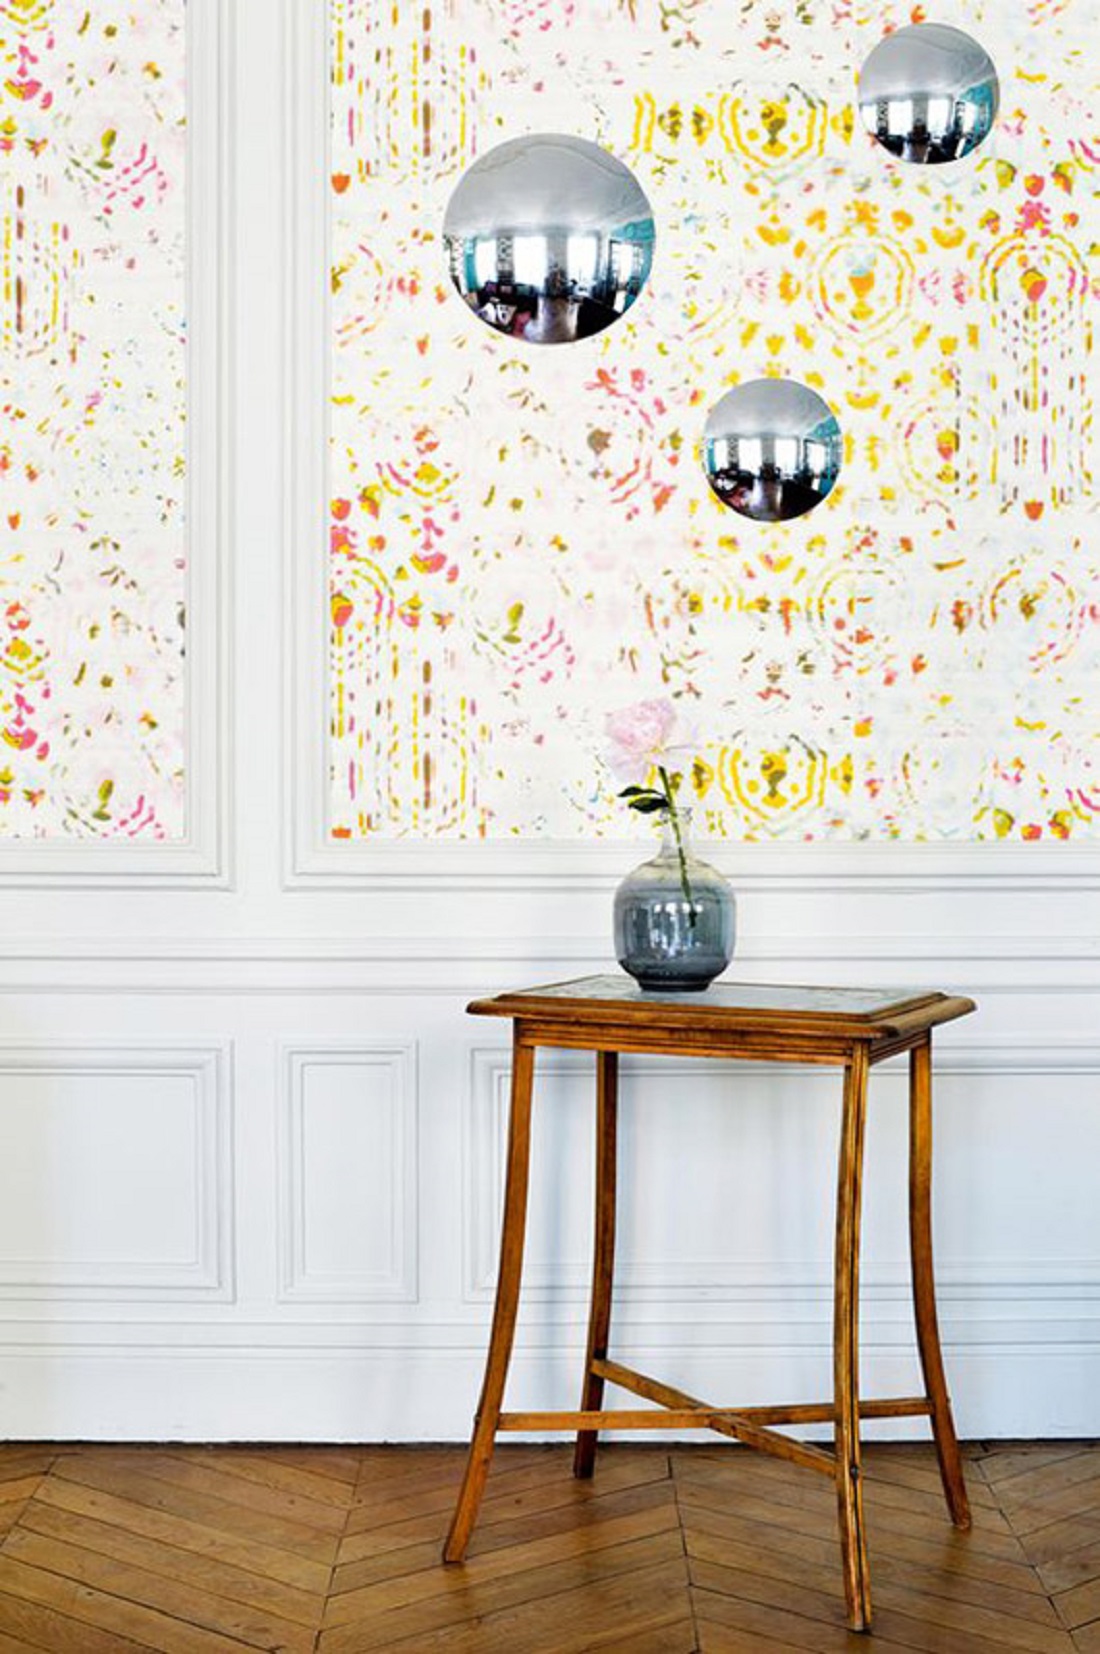 @projectfairytale: Parisian Apartment Full of Charm and Color